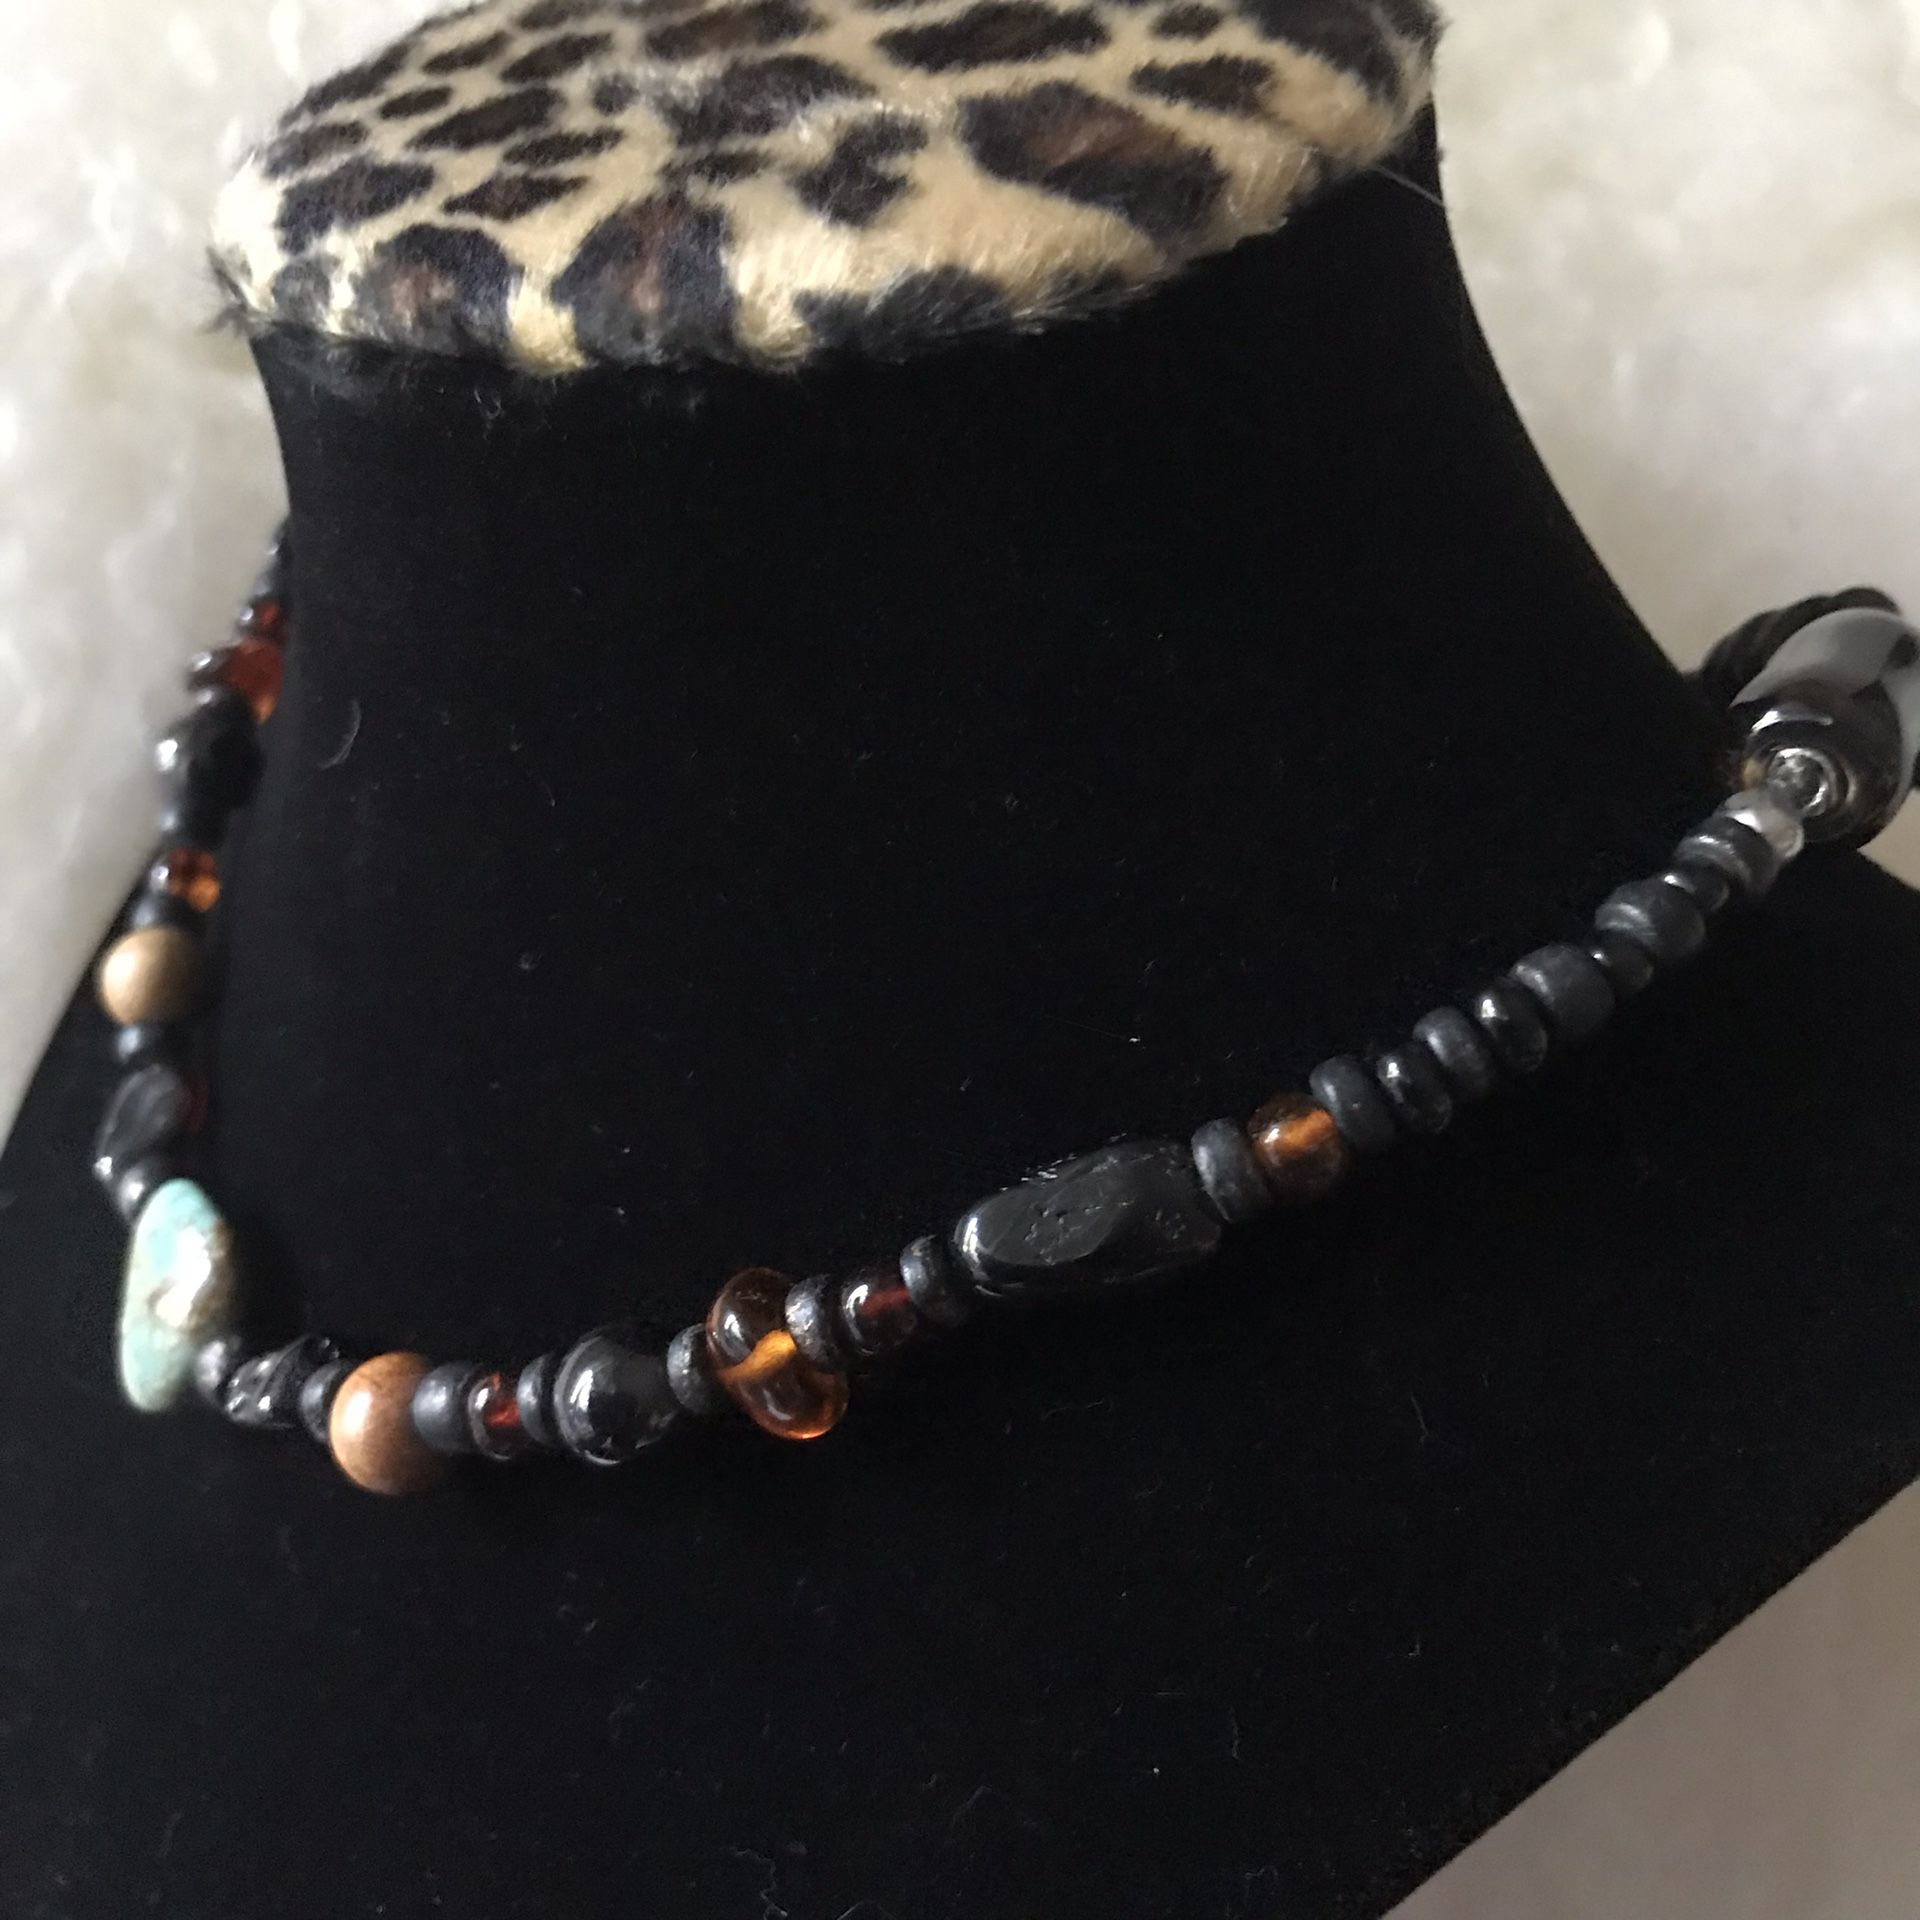 Vintage Real Turquoises Stone, Amber, Onyx And Another Semiprecious Stones Adjustable Necklace.